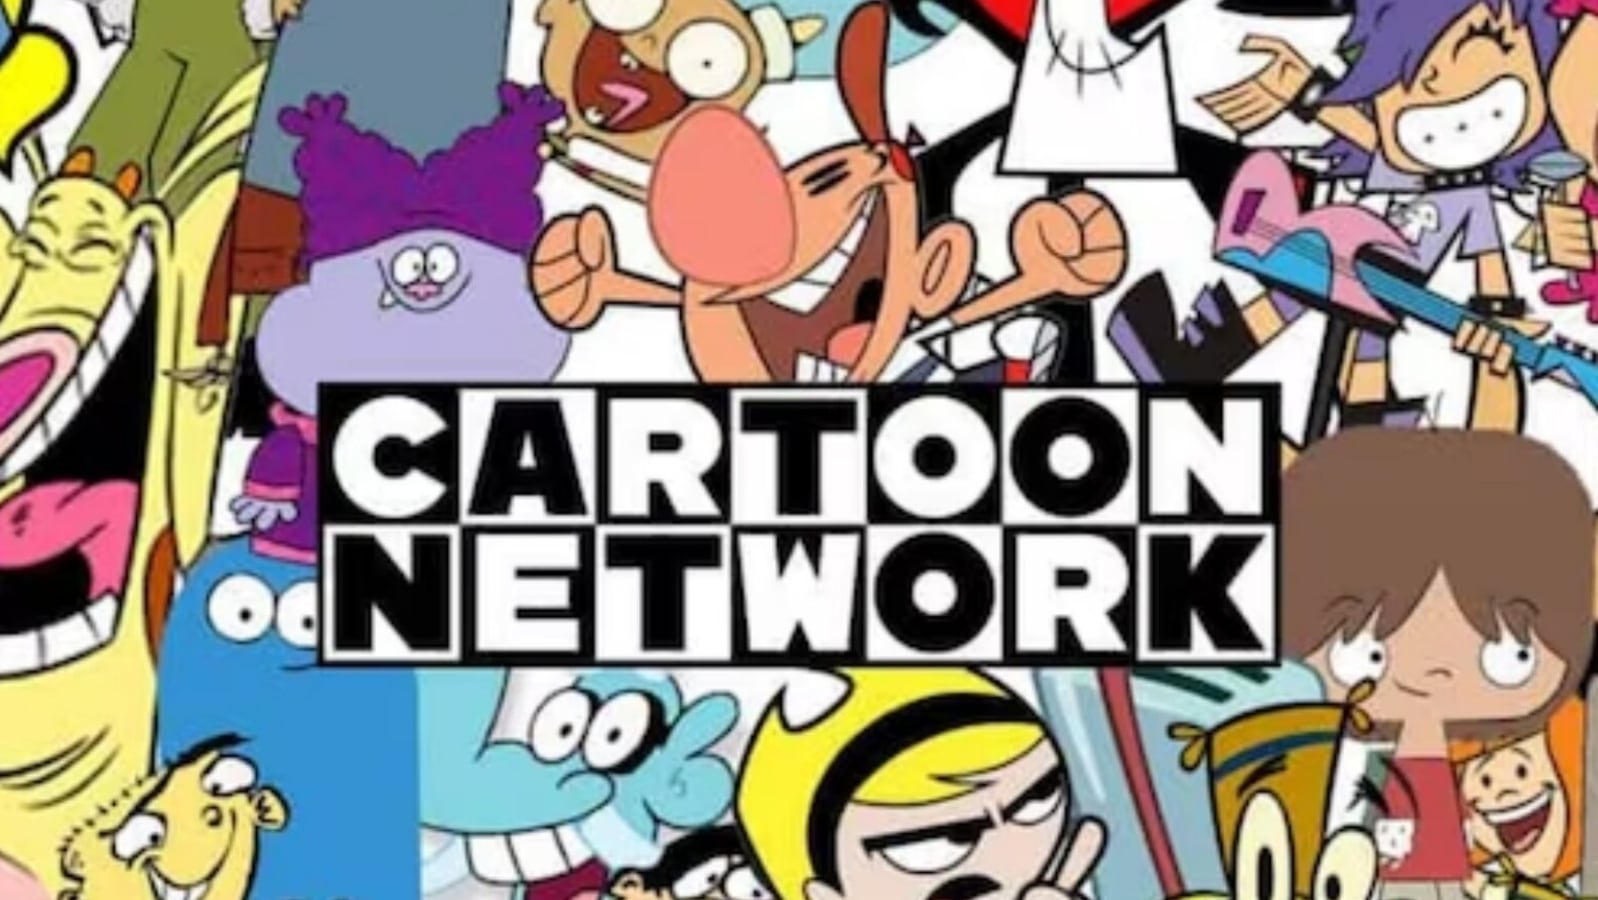 after-rip-cartoon-network-trends-on-twitter-channel-clarifies-we-re-not-dead